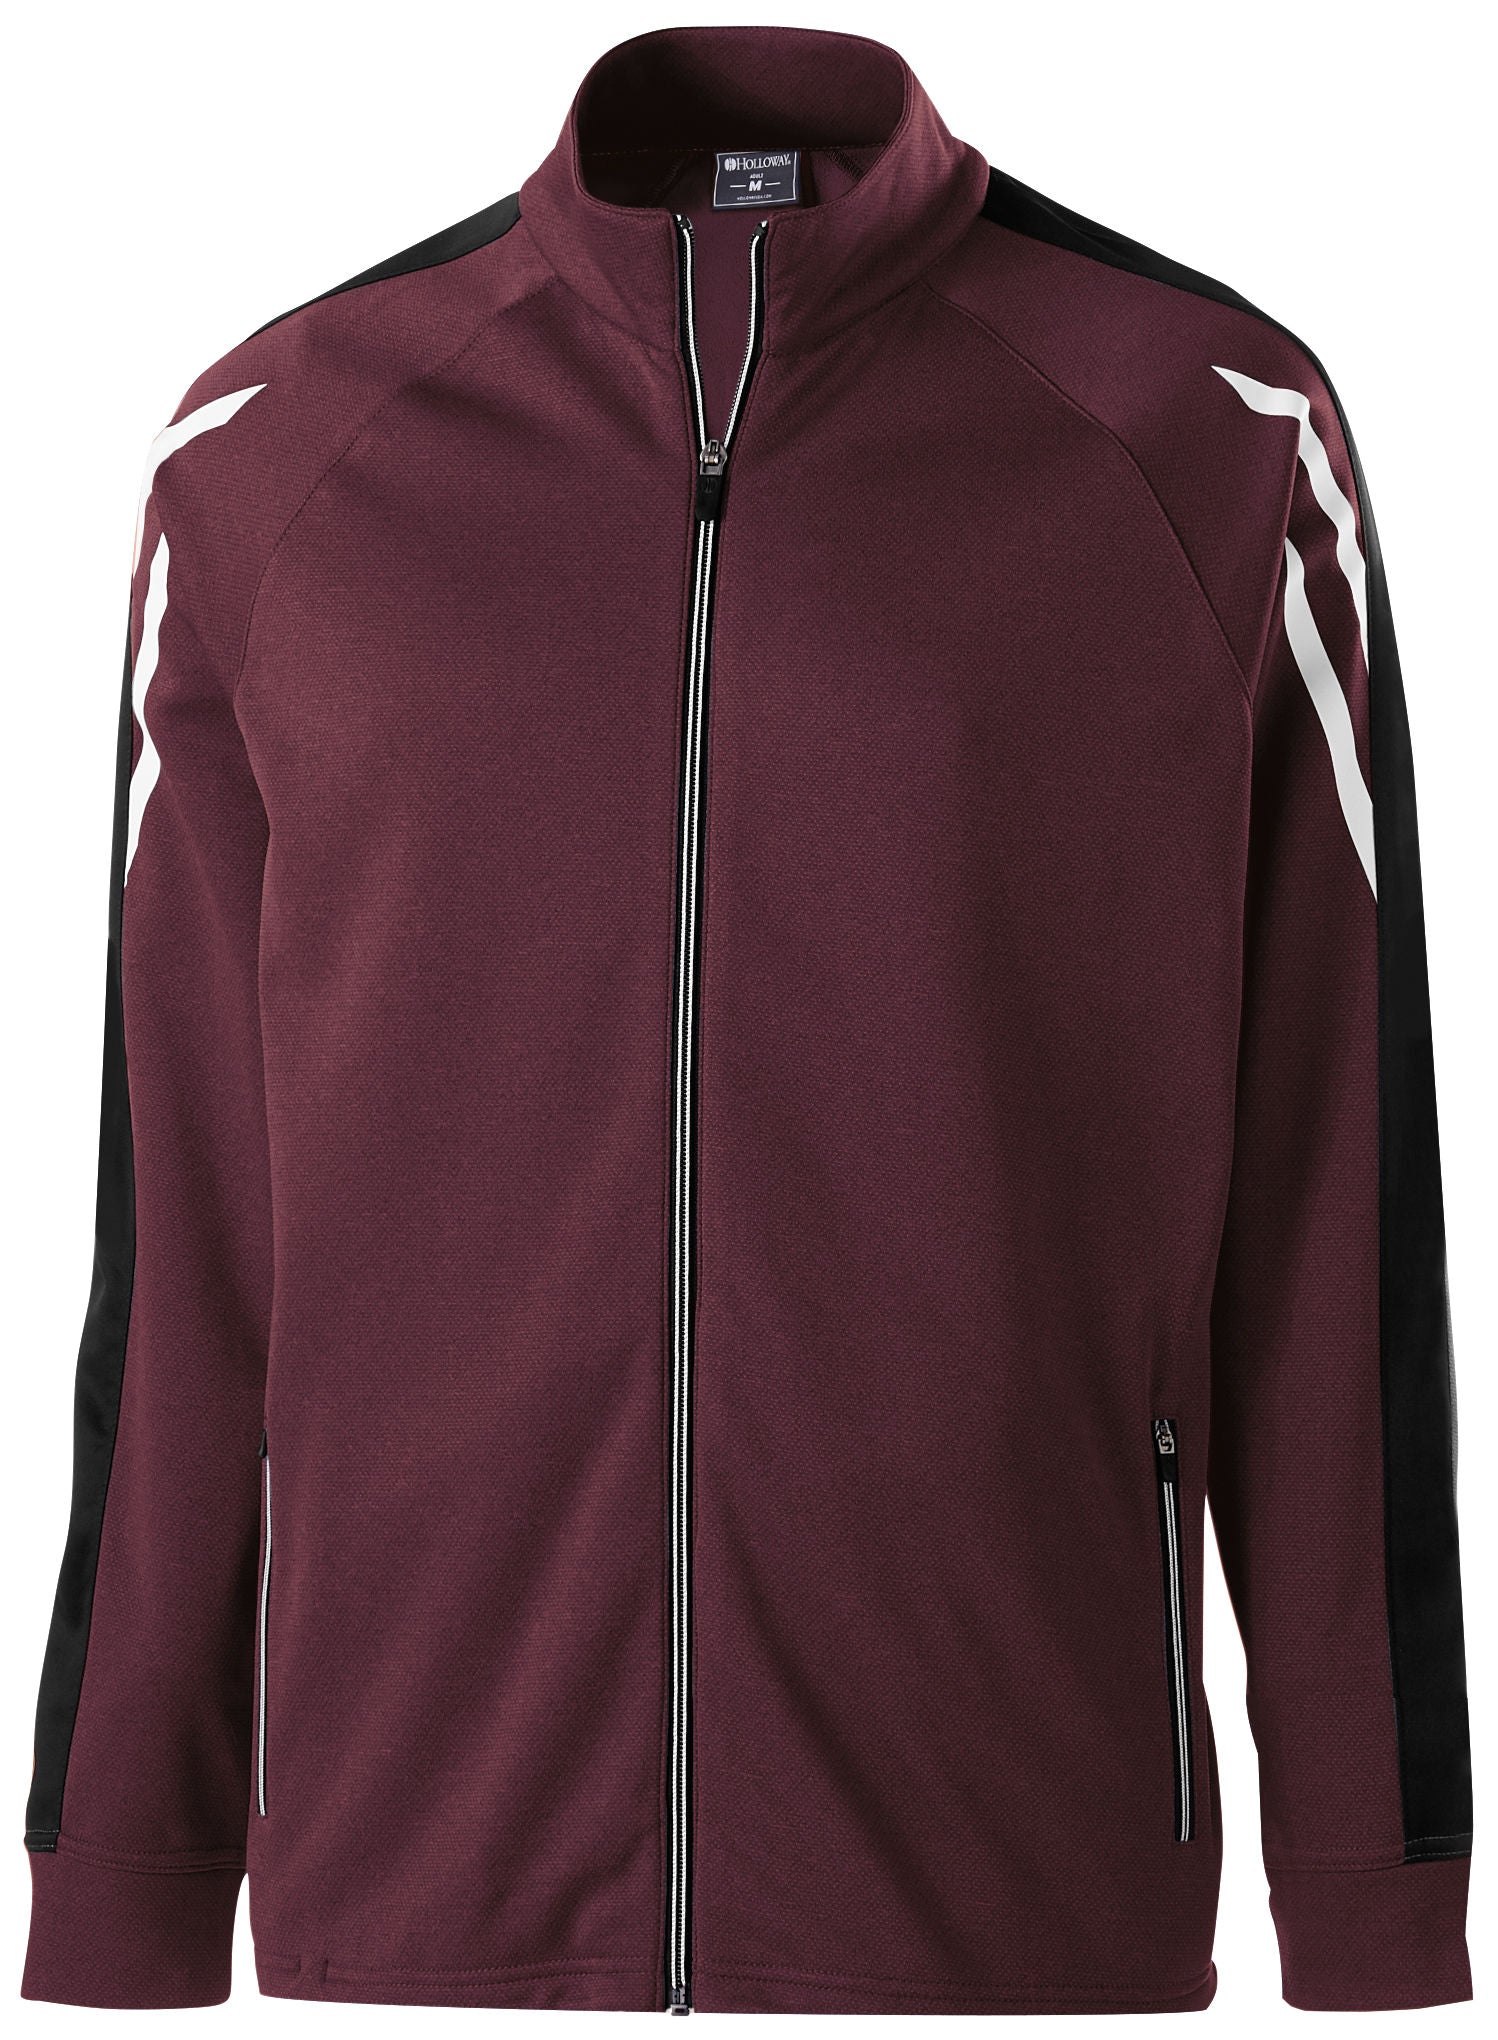 Holloway Flux Jacket in Maroon Heather/Black/White  -Part of the Adult, Adult-Jacket, Holloway, Outerwear, Flux-Collection, Corporate-Collection product lines at KanaleyCreations.com